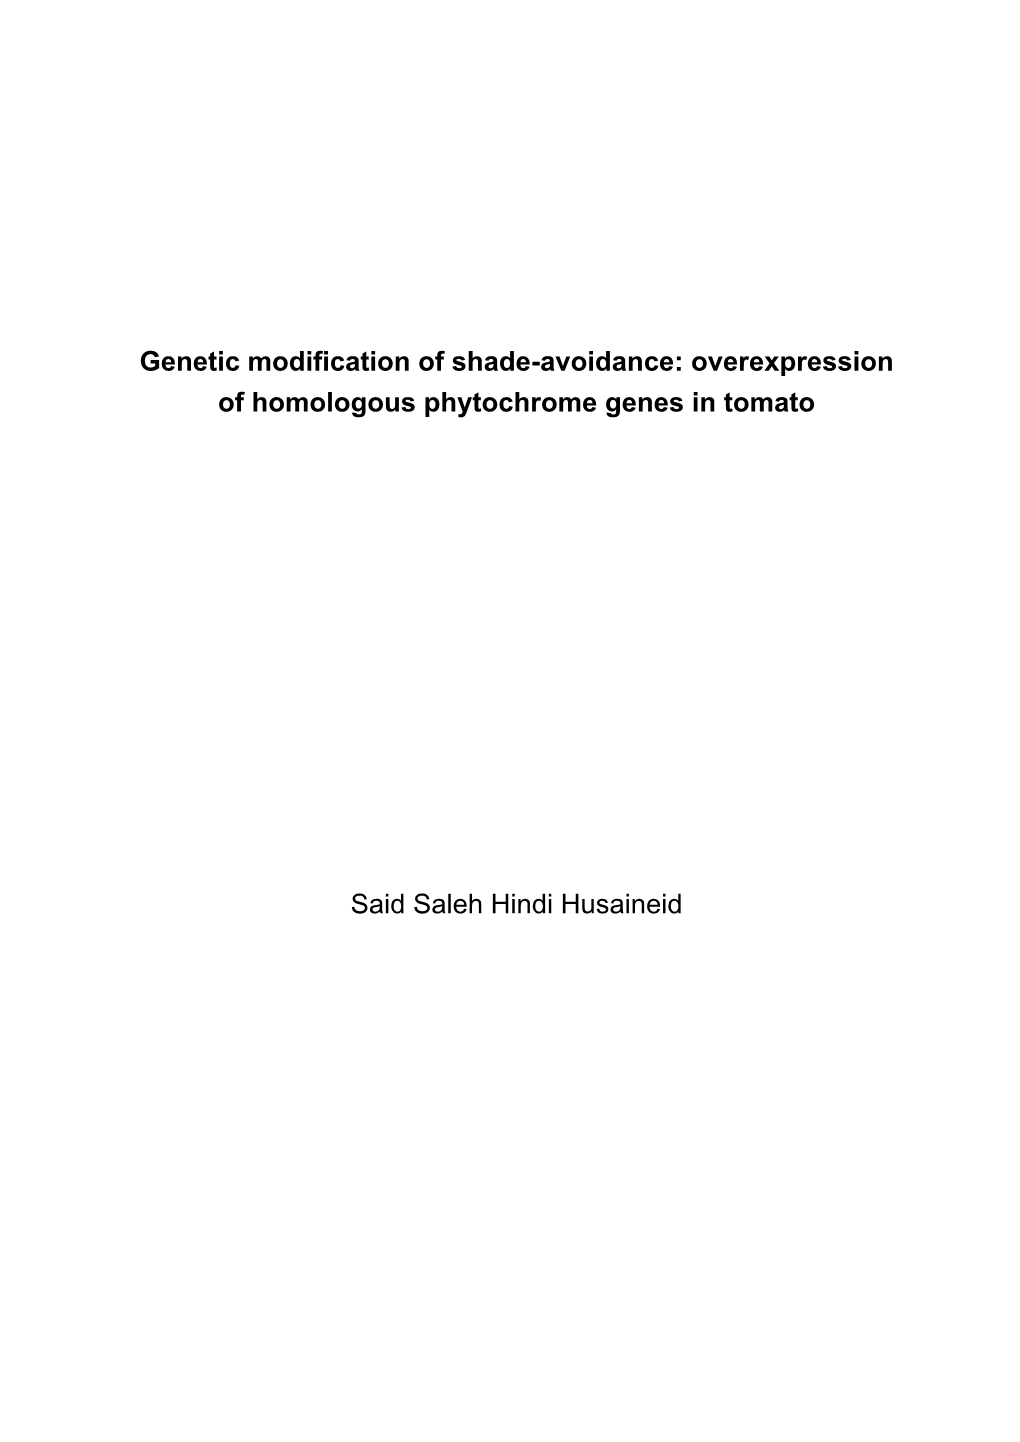 Overexpression of Homologous Phytochrome Genes in Tomato